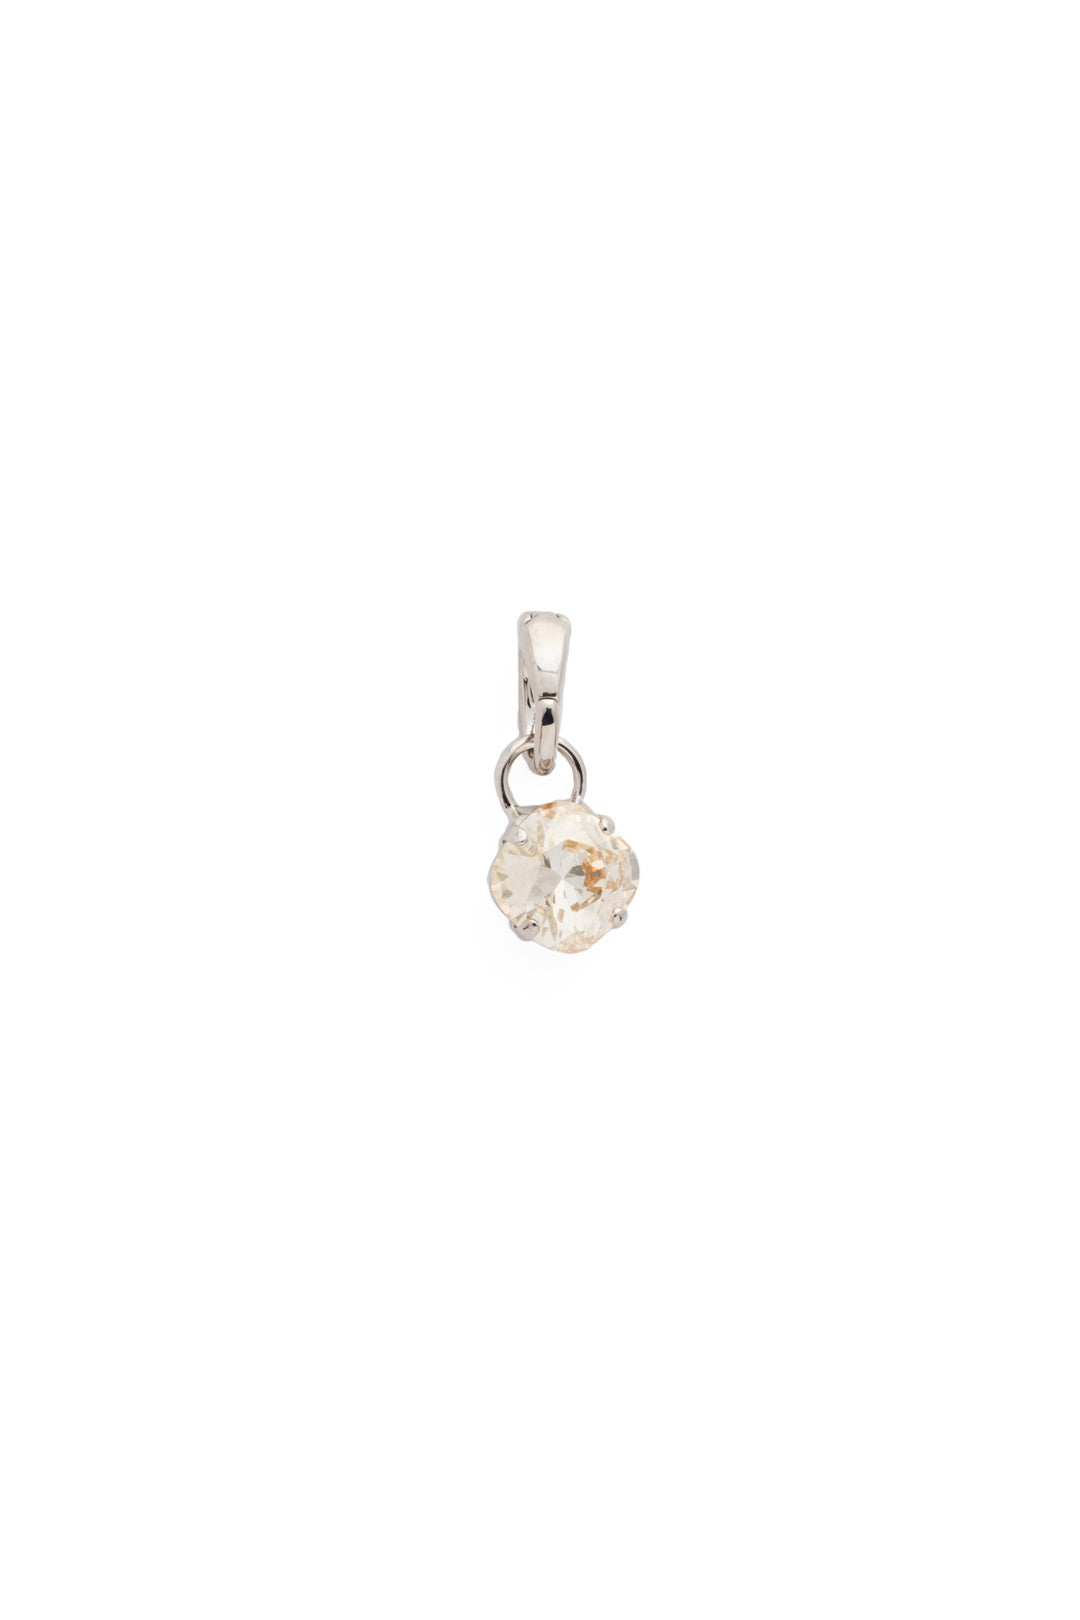 November Birthstone Crystal Champagne Charm - CEU1RHCCH - <p>A cushion-cut crystal designed in your beautiful birthstone. Simply attach it to our favorite chain for an everyday look. From Sorrelli's Crystal Champagne collection in our Palladium Silver-tone finish.</p>